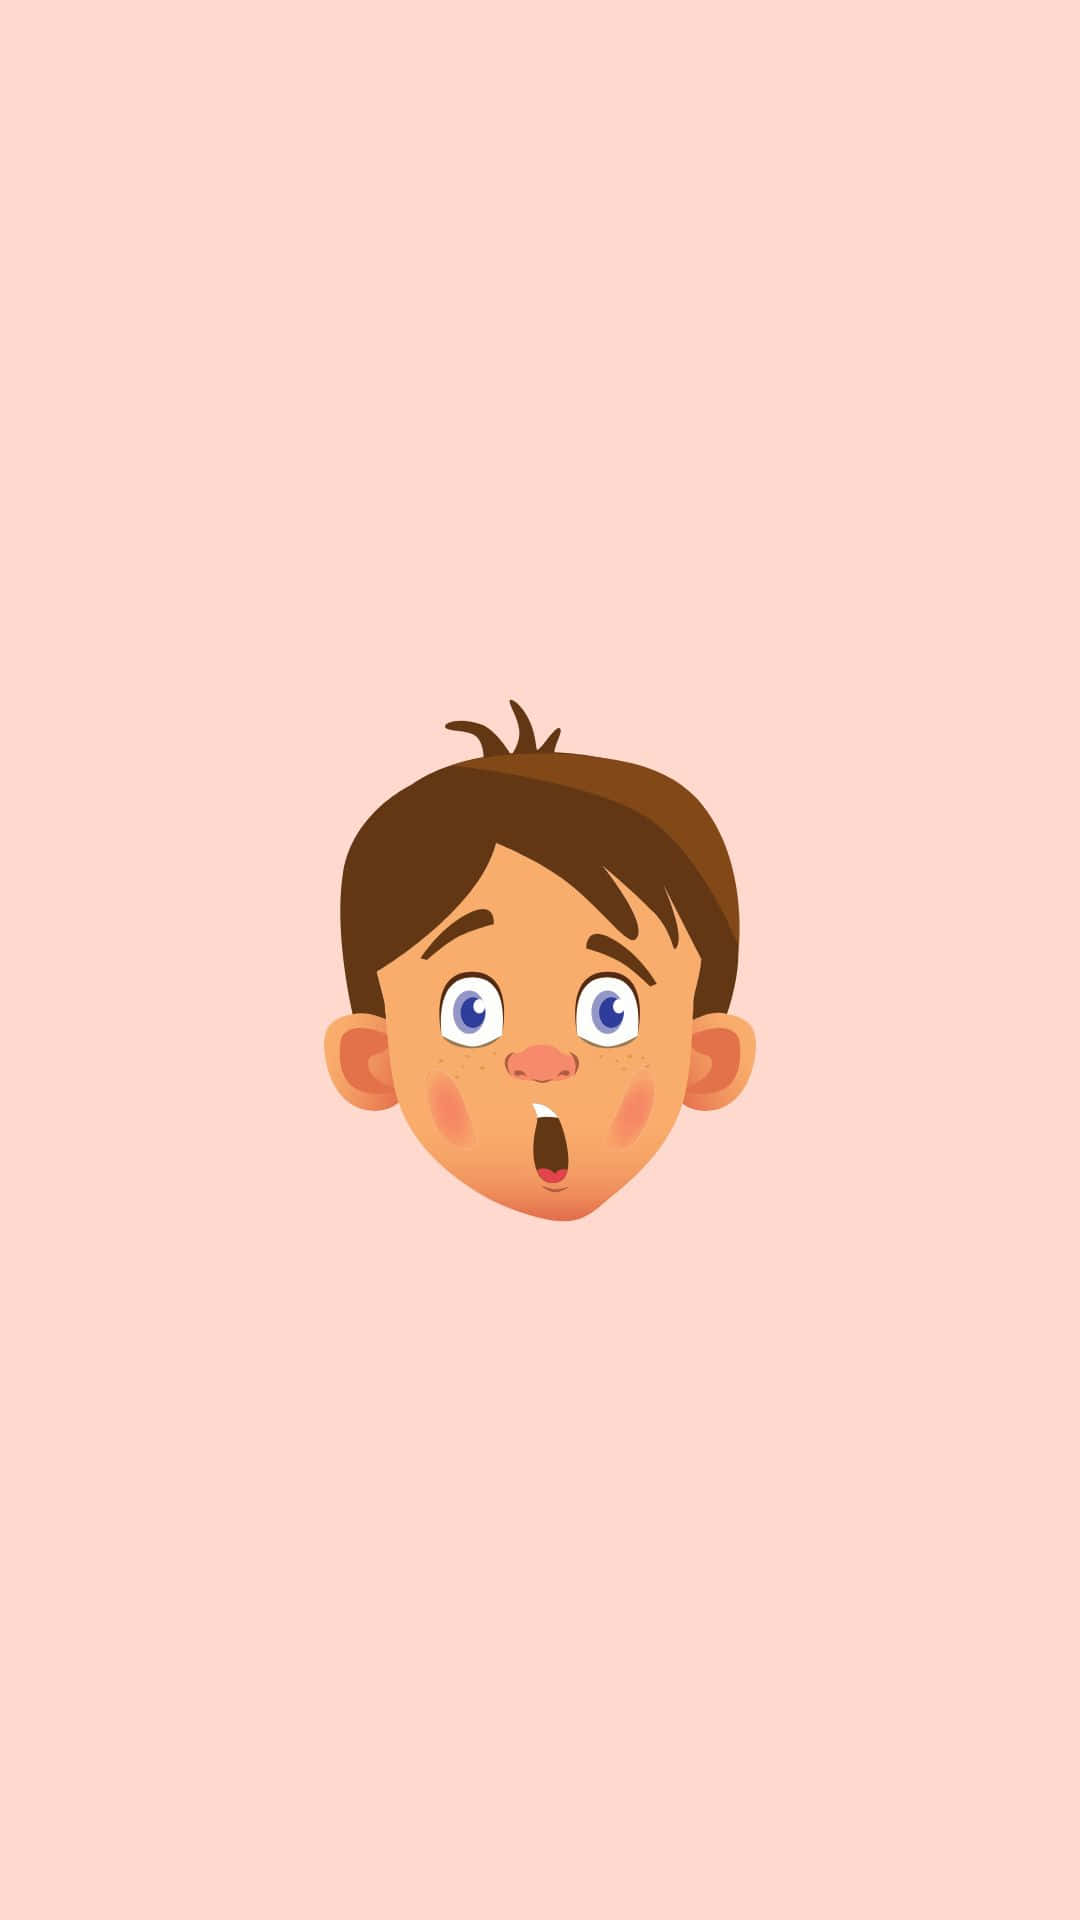 Handsome Boy Cartoon With Shocked Expression Wallpaper